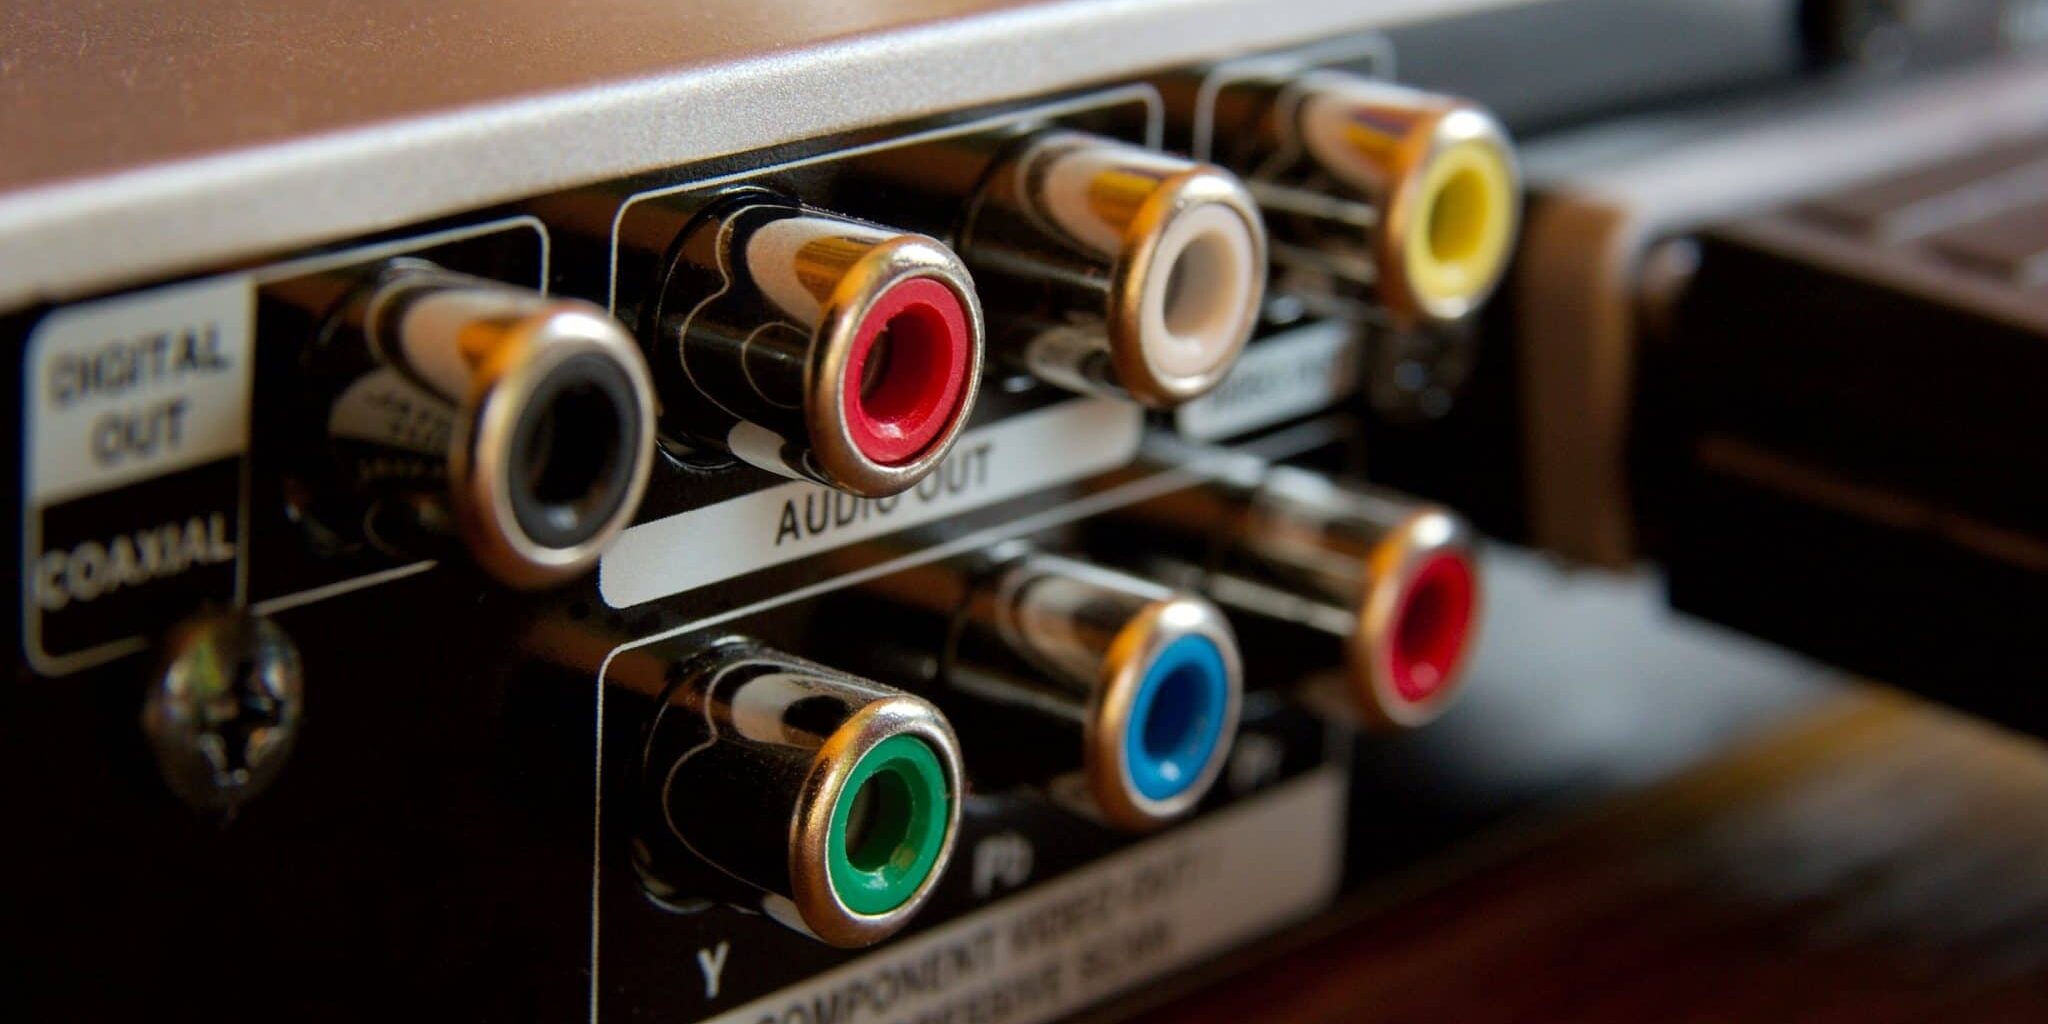 RCA connections on the back of a DVD player